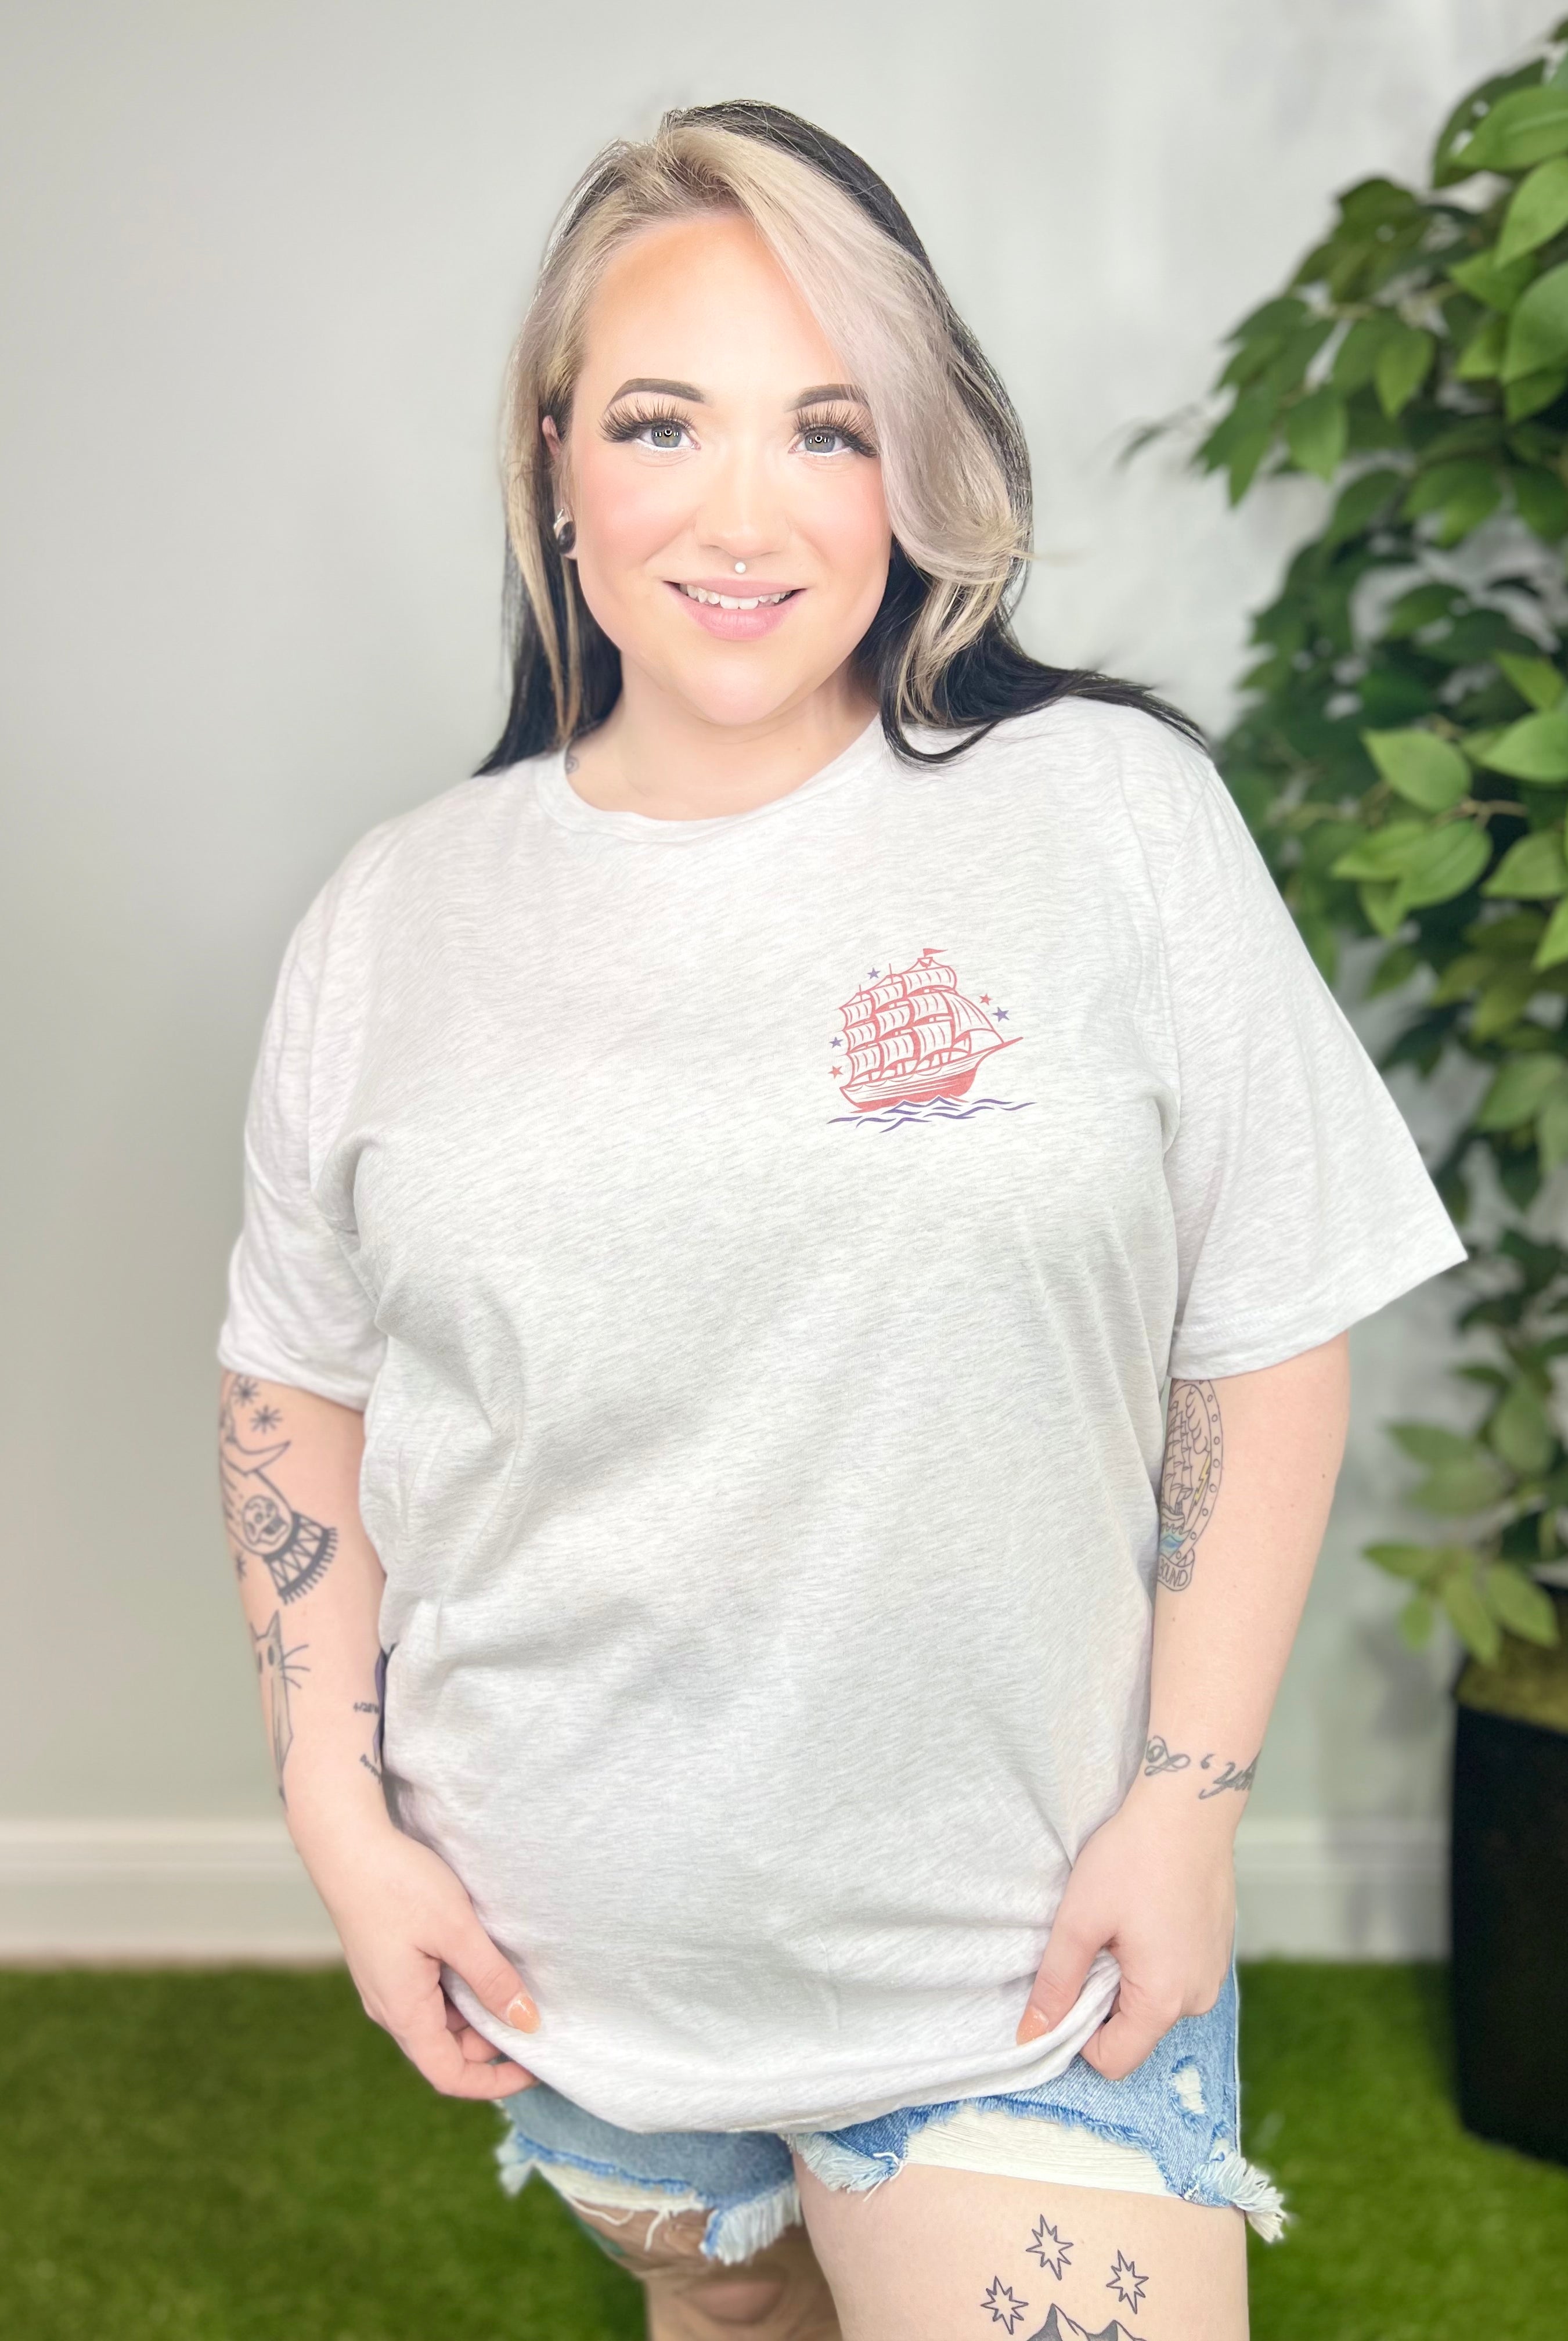 Spilling the Tea Since 1773 Graphic Tee-130 Graphic Tees-Heathered Boho-Heathered Boho Boutique, Women's Fashion and Accessories in Palmetto, FL